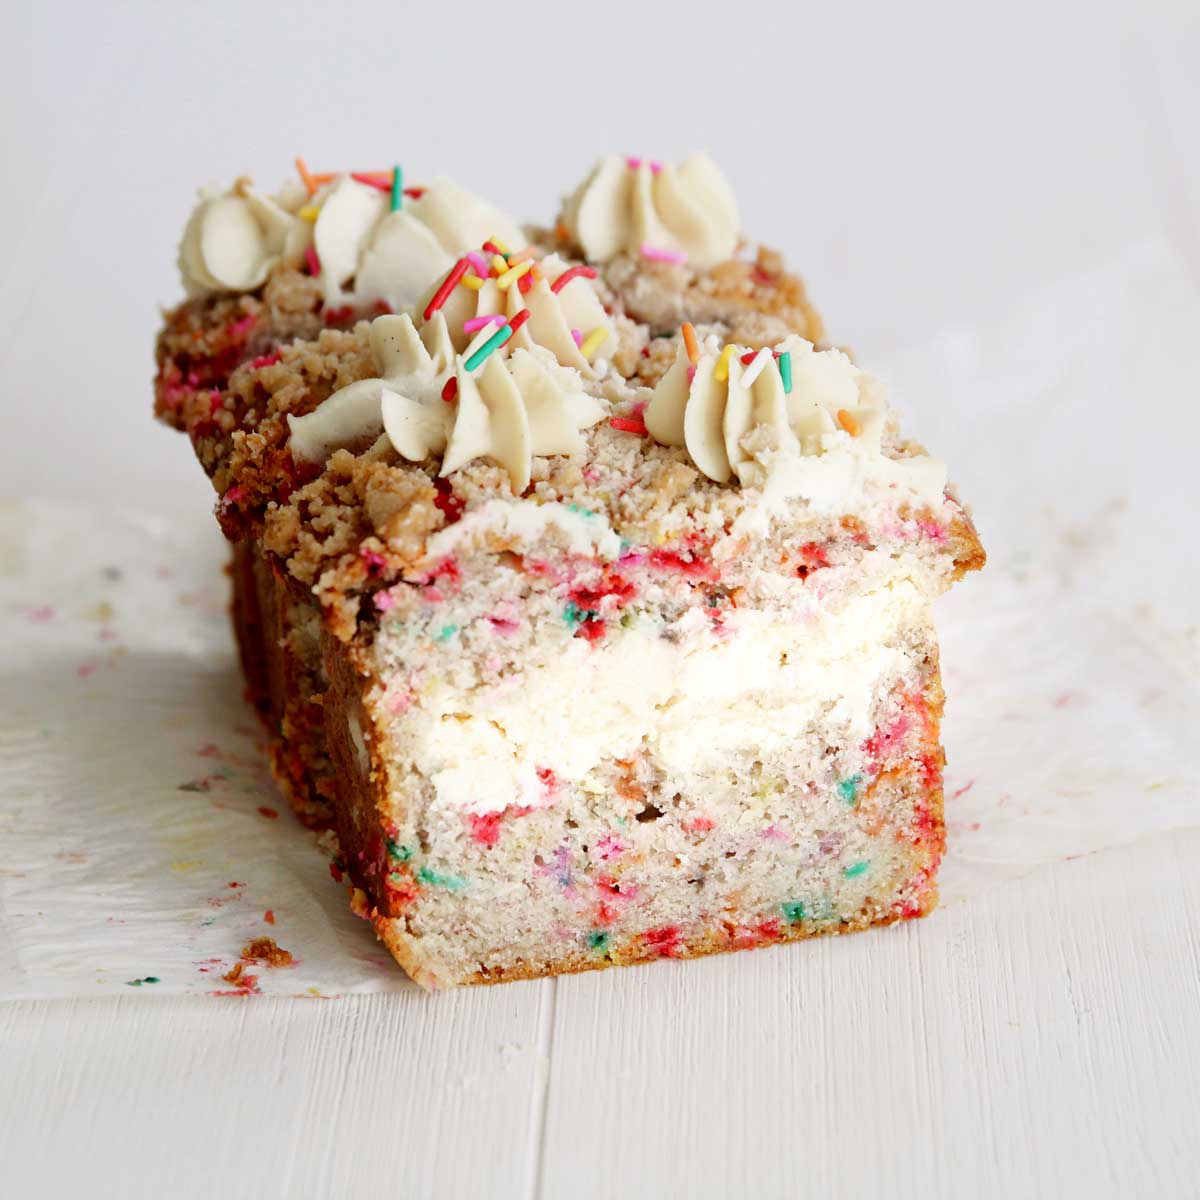 It's Your Birthday Cake Banana Bread with Cream Cheese Filling (No Eggs, No Butter) - Birthday Cake Banana Bread